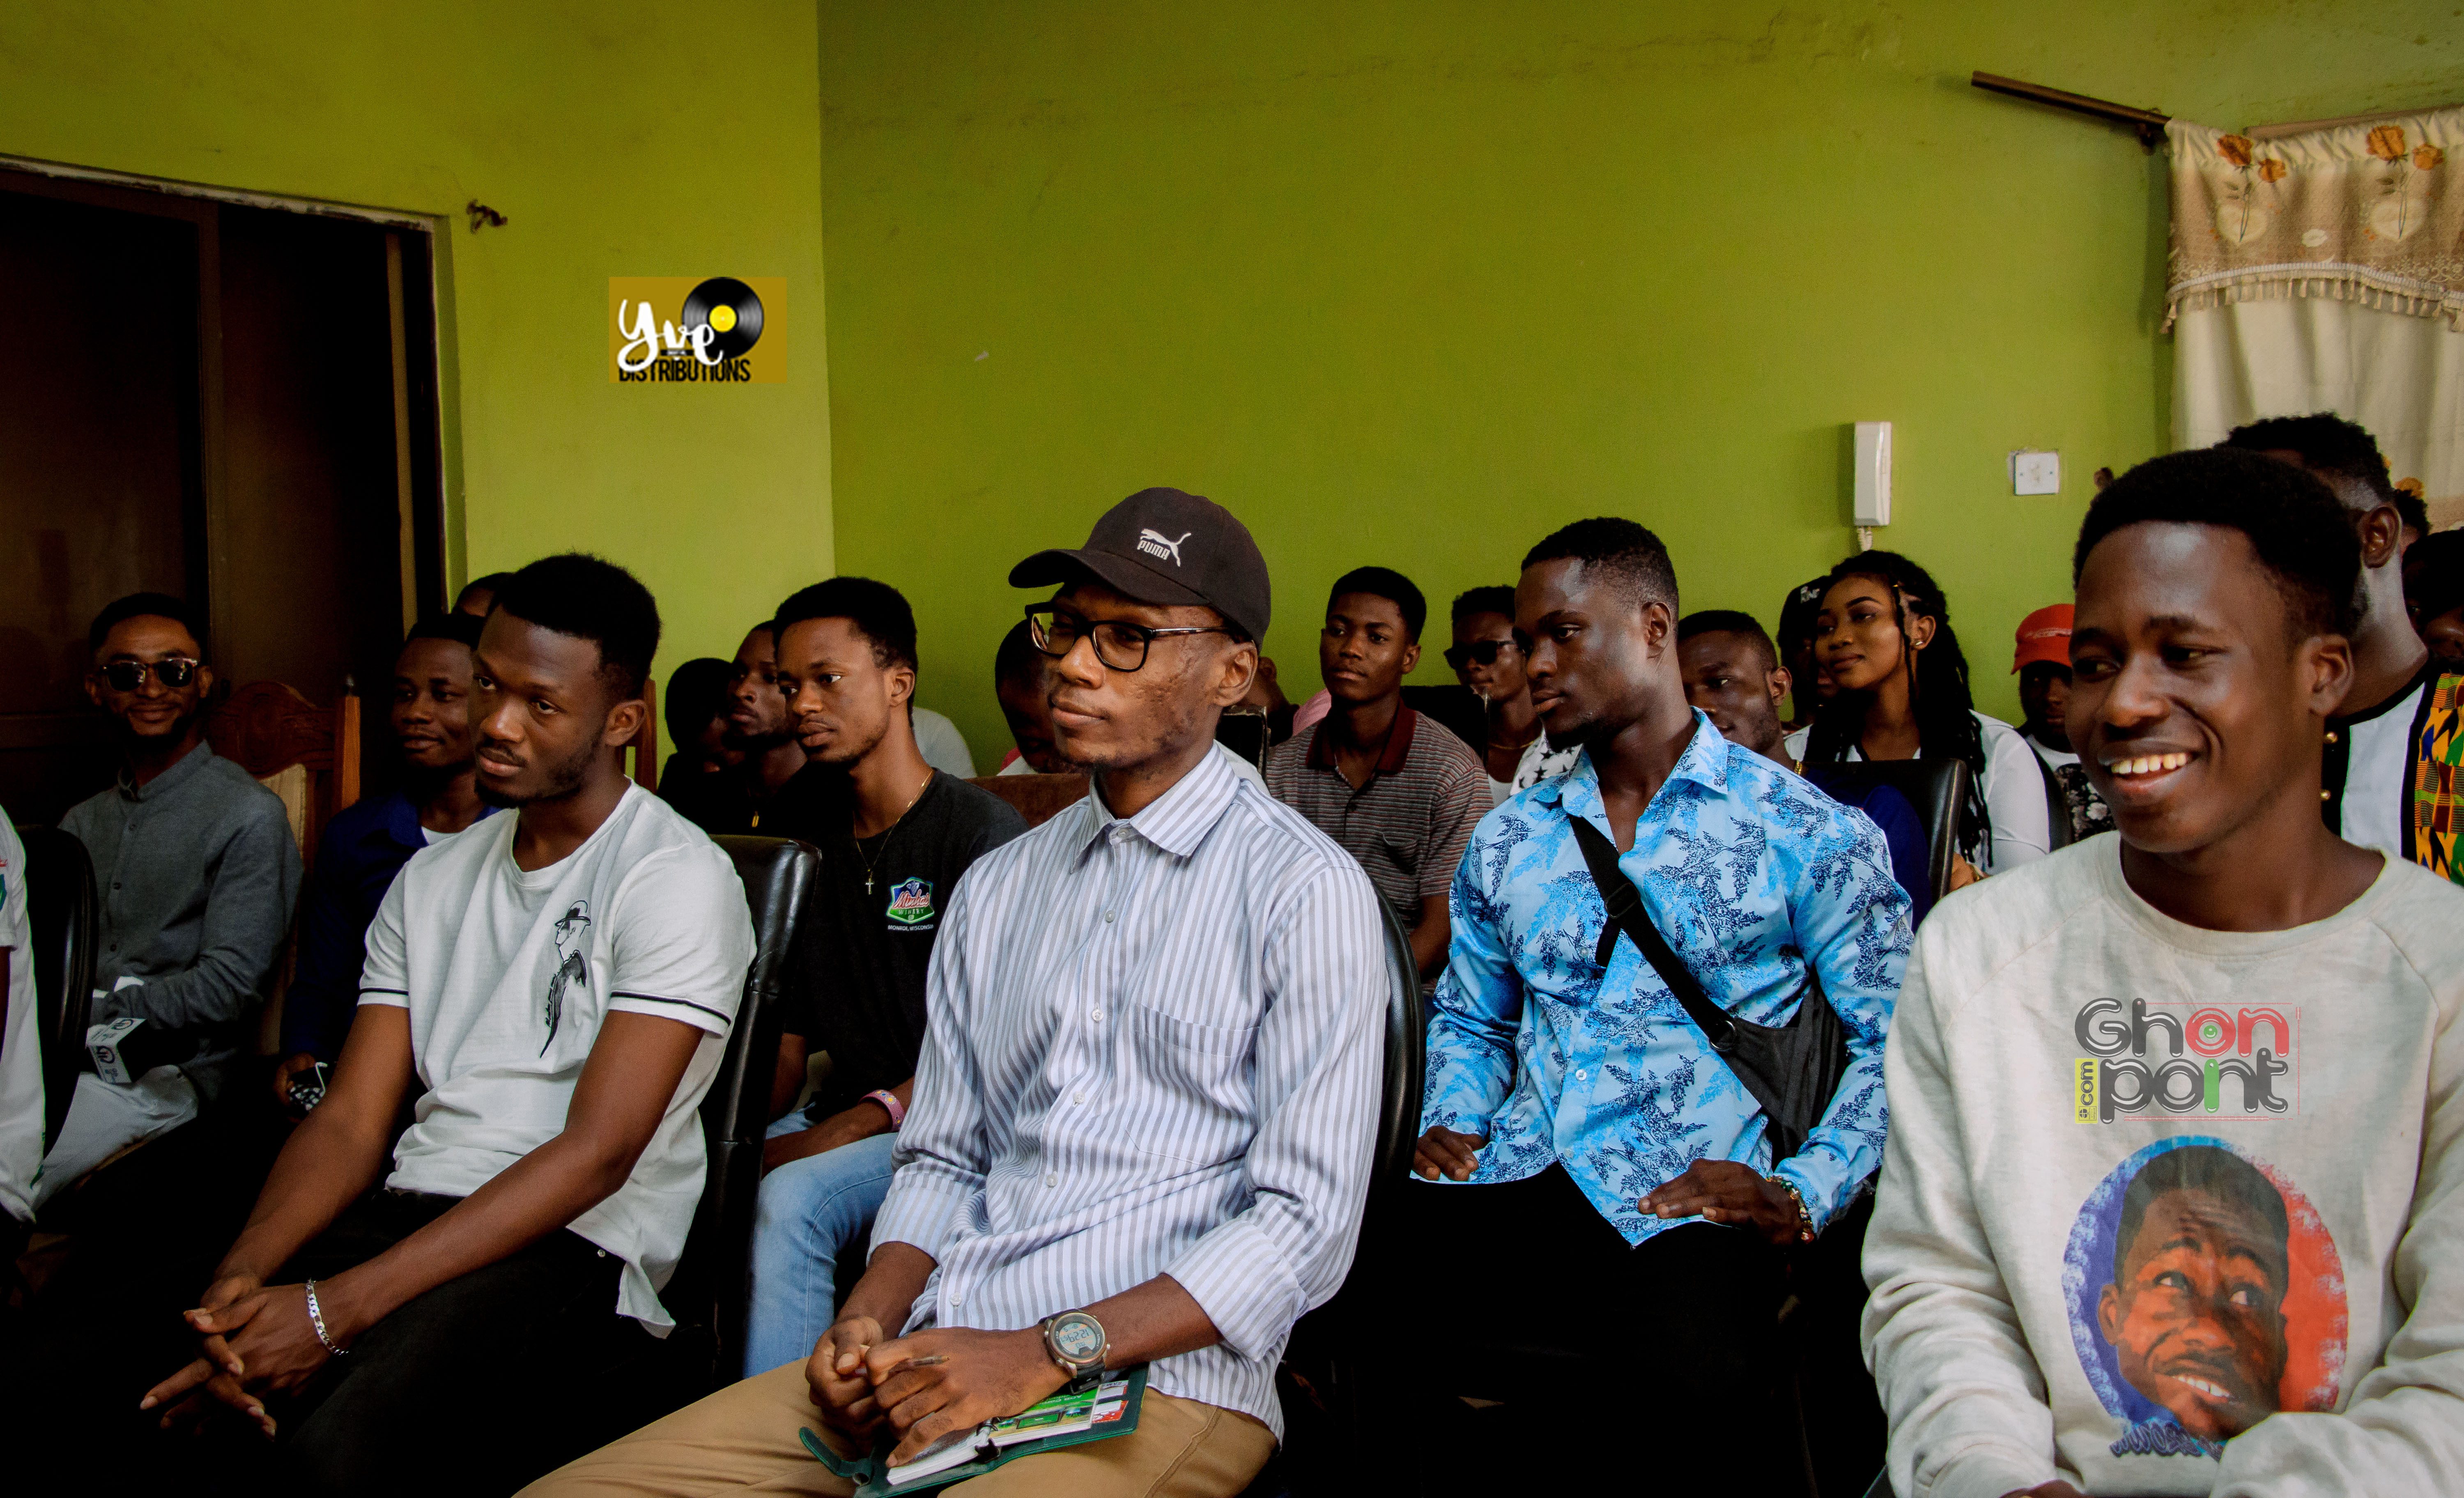 Yve Digital holds First Music And Money Workshop in Kumasi